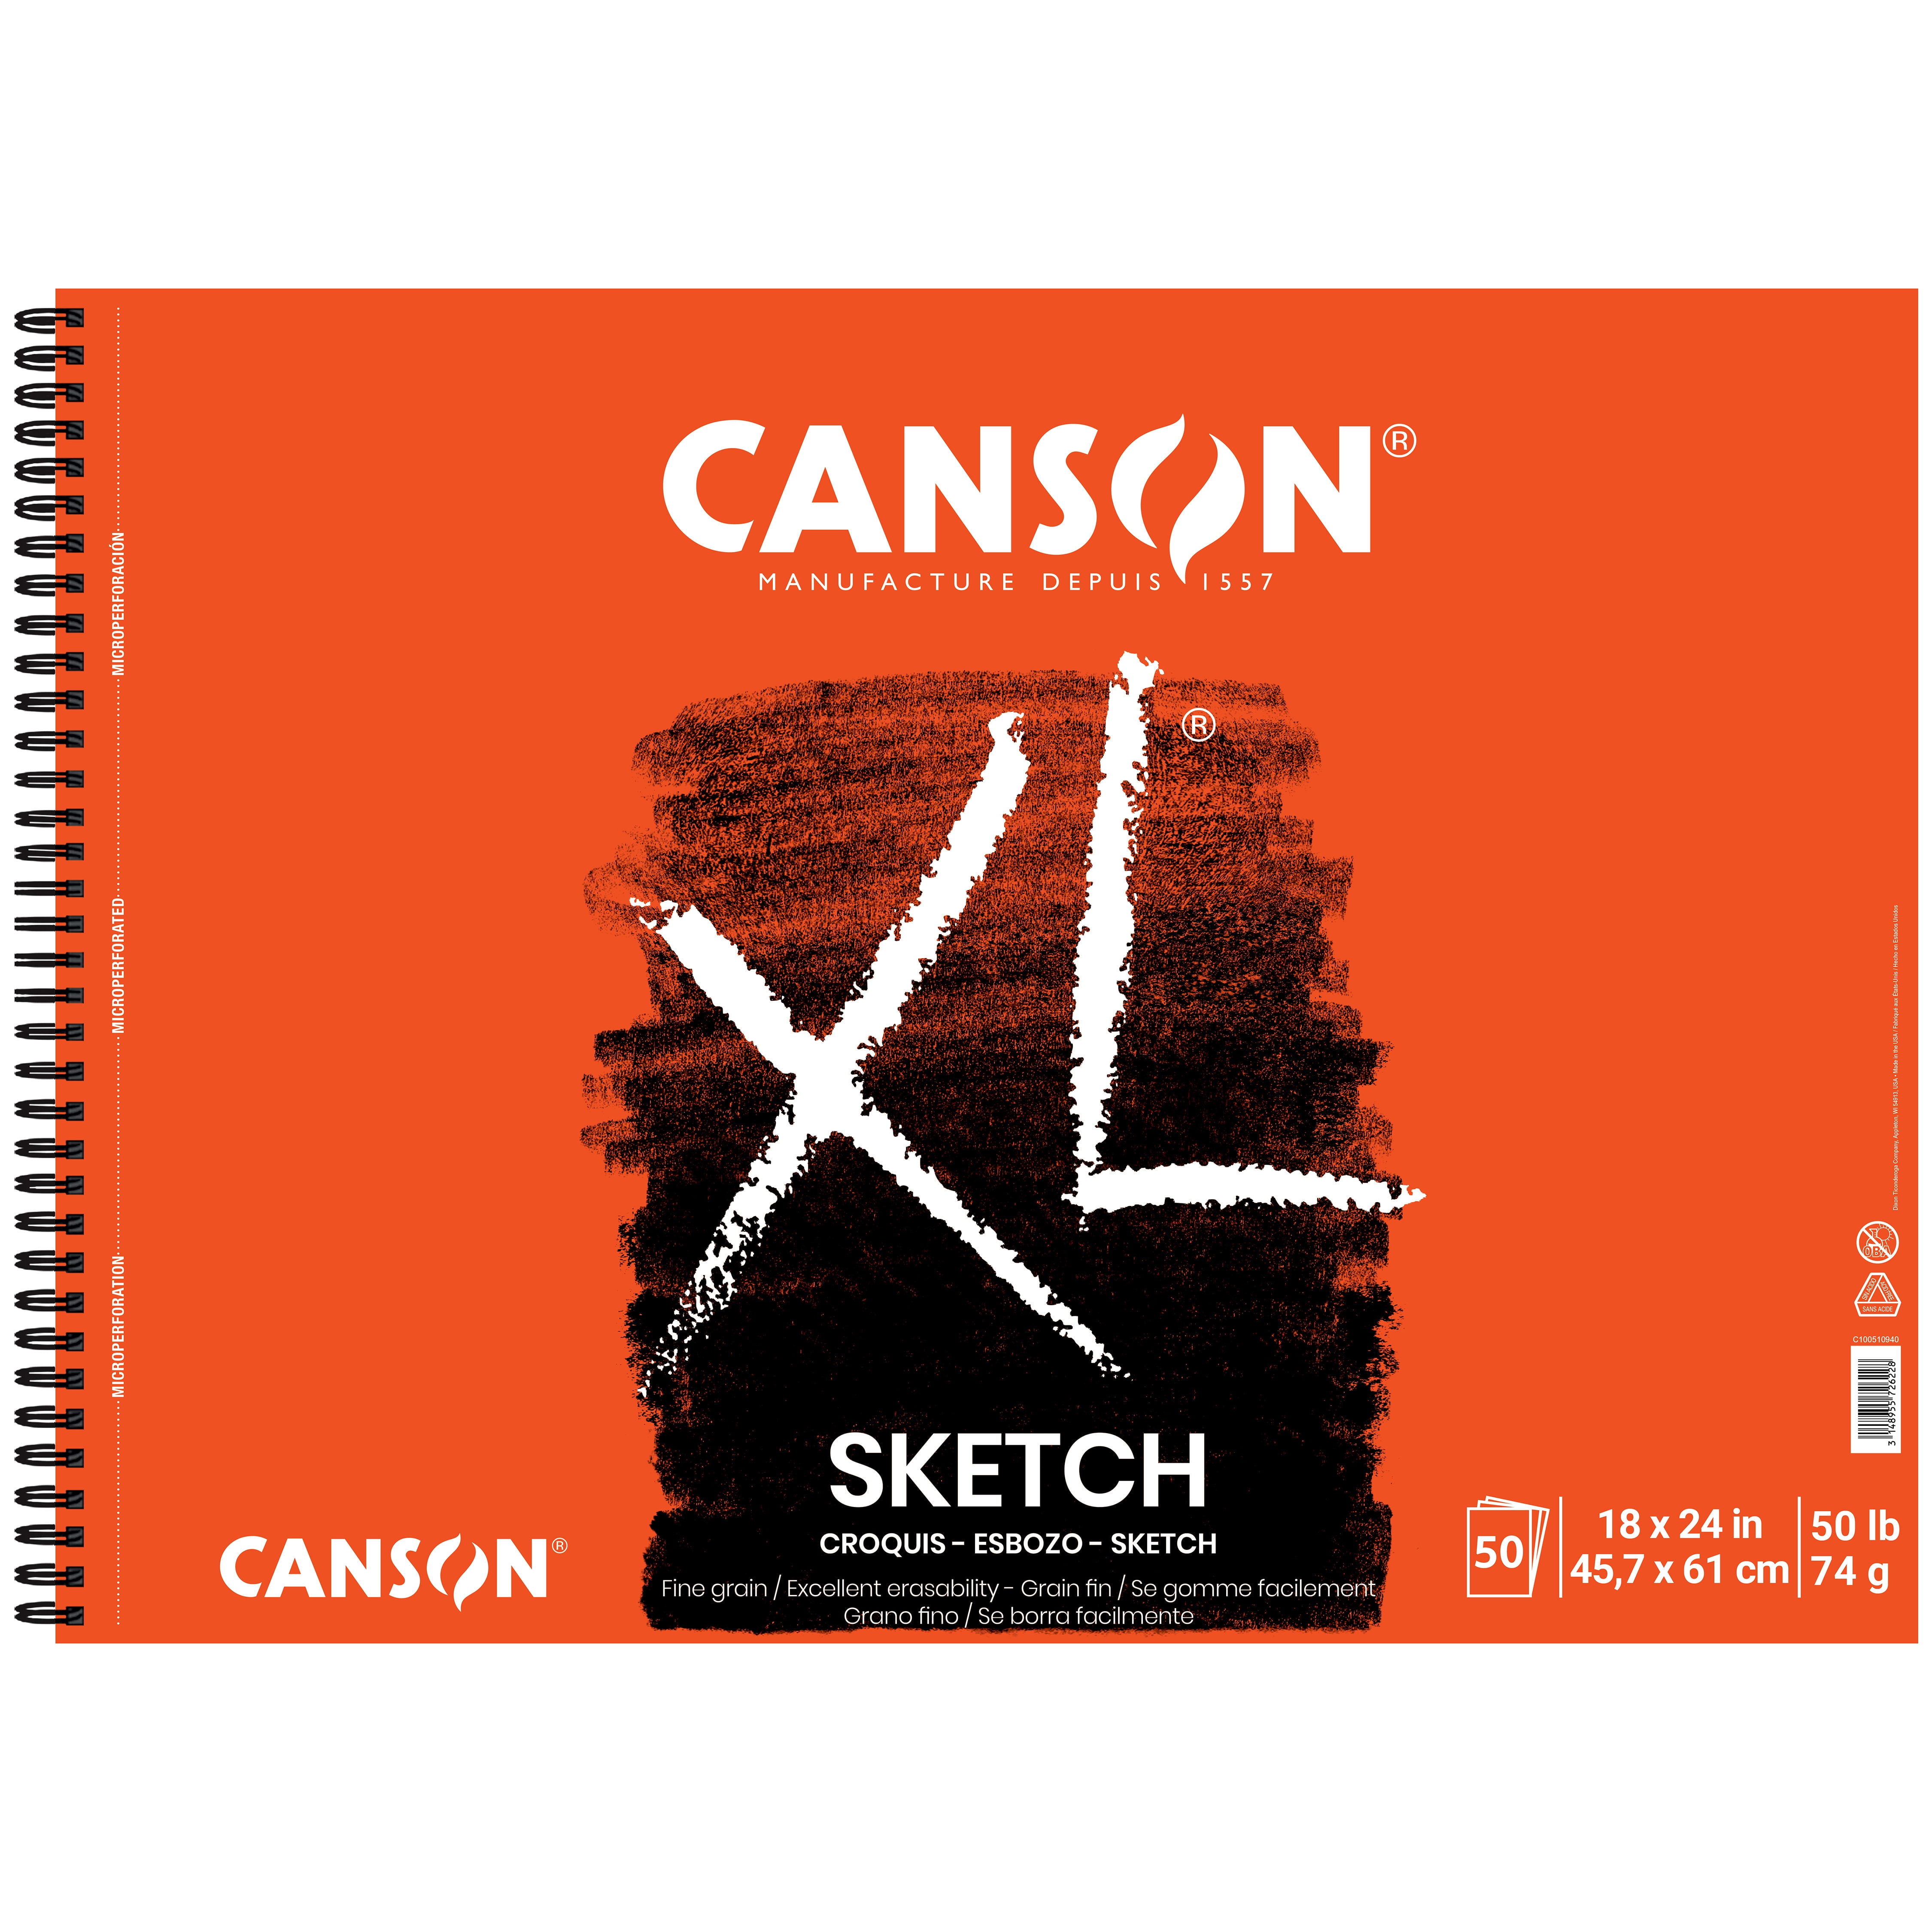 NeweggBusiness - Canson XL Newsprint Pads 24 In. x 36 In. Pad Of